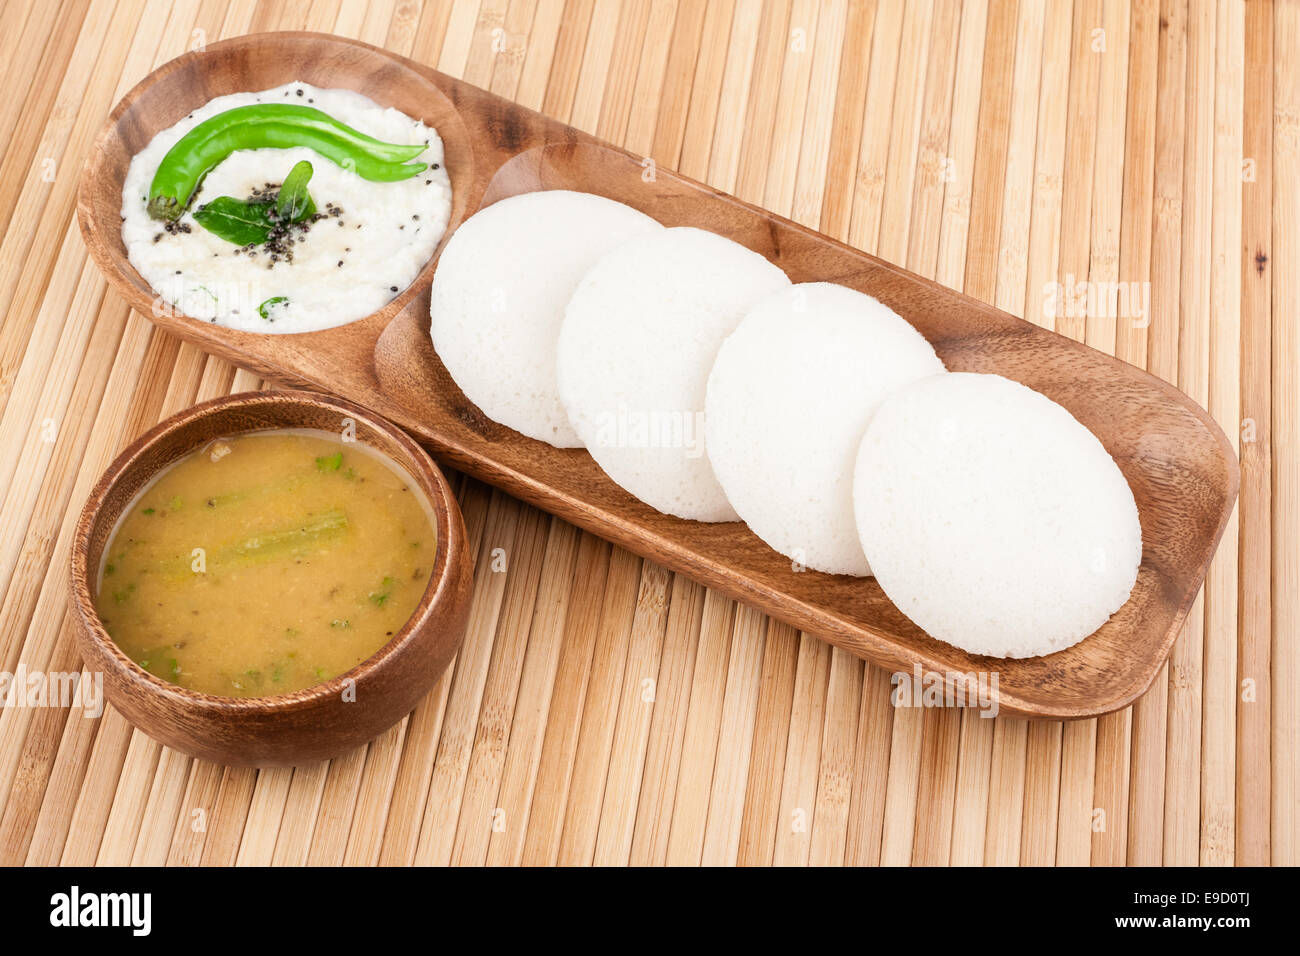 A traditional ethnic south Indian breakfast of Idly (Idli / rice cake) served with coconut chutney and sambar. Stock Photo